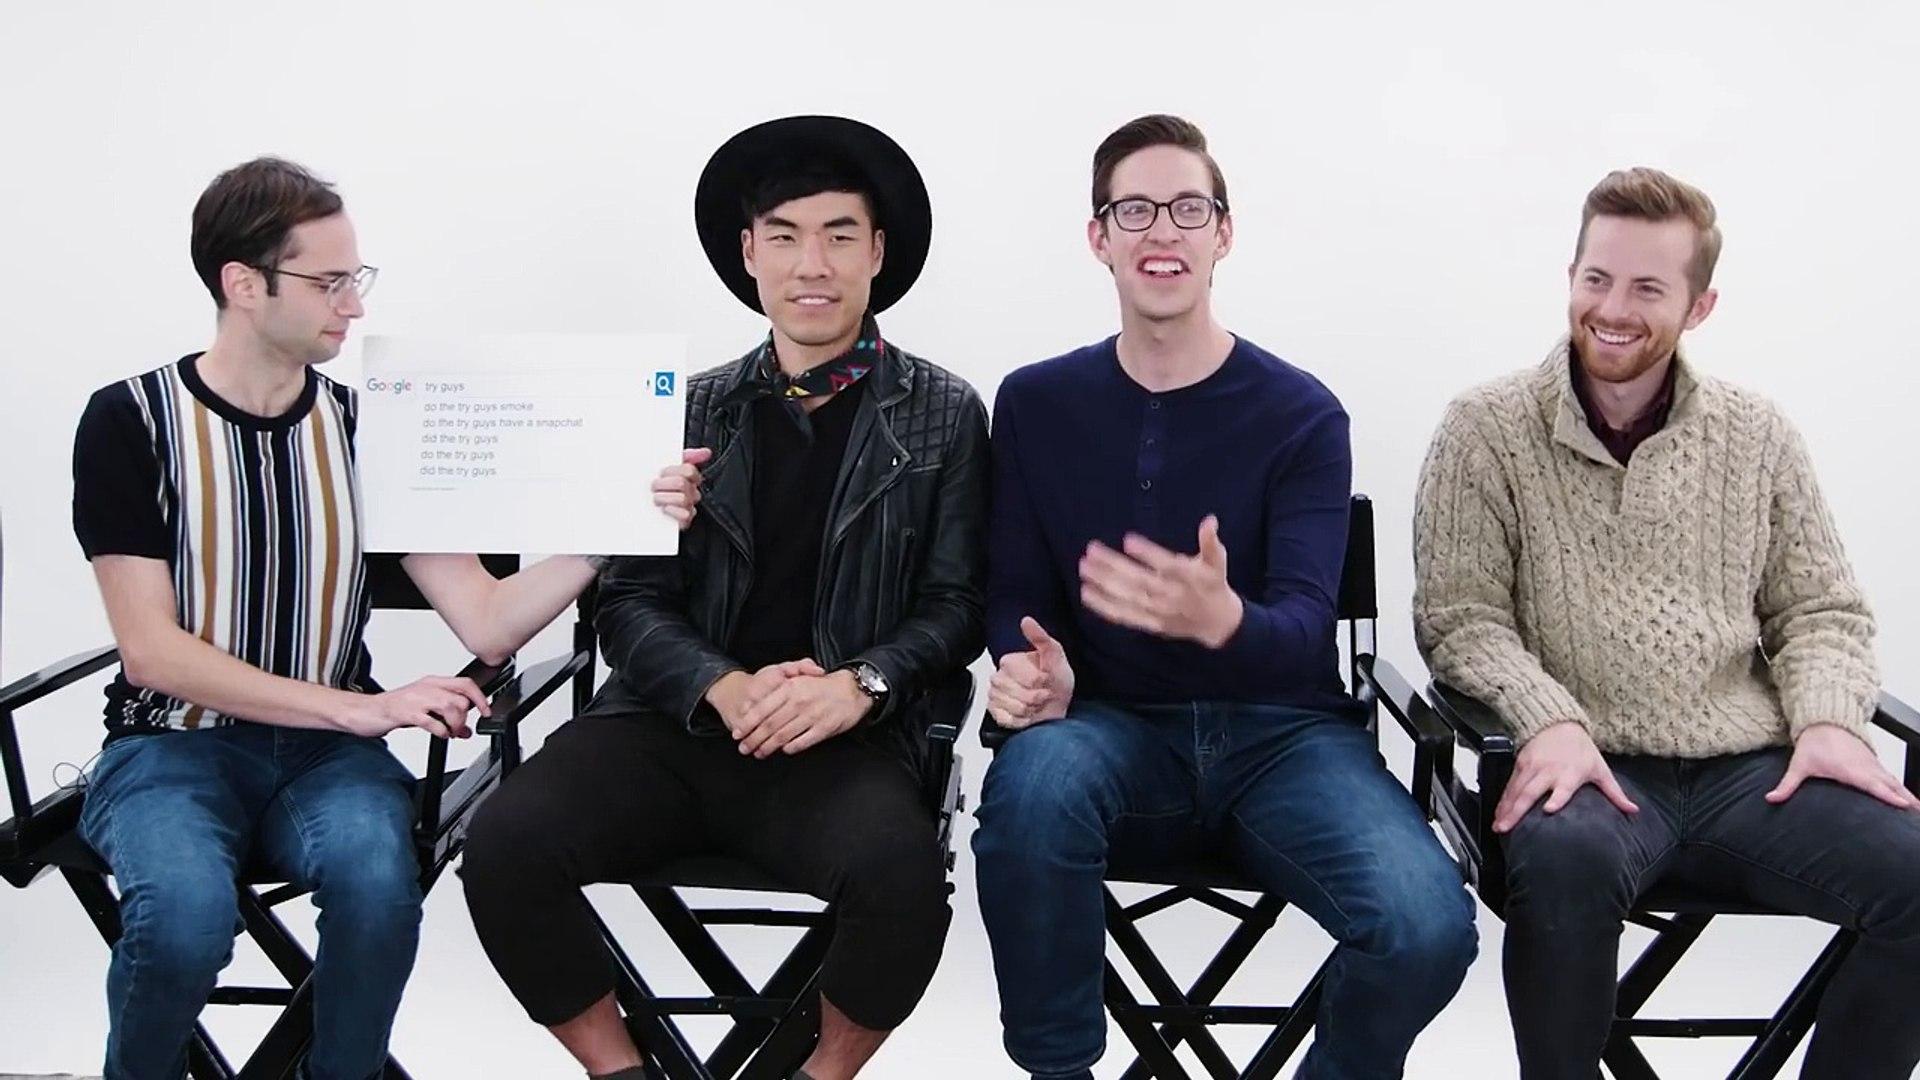 The Try Guys Answer the Web's Most Searched Questions